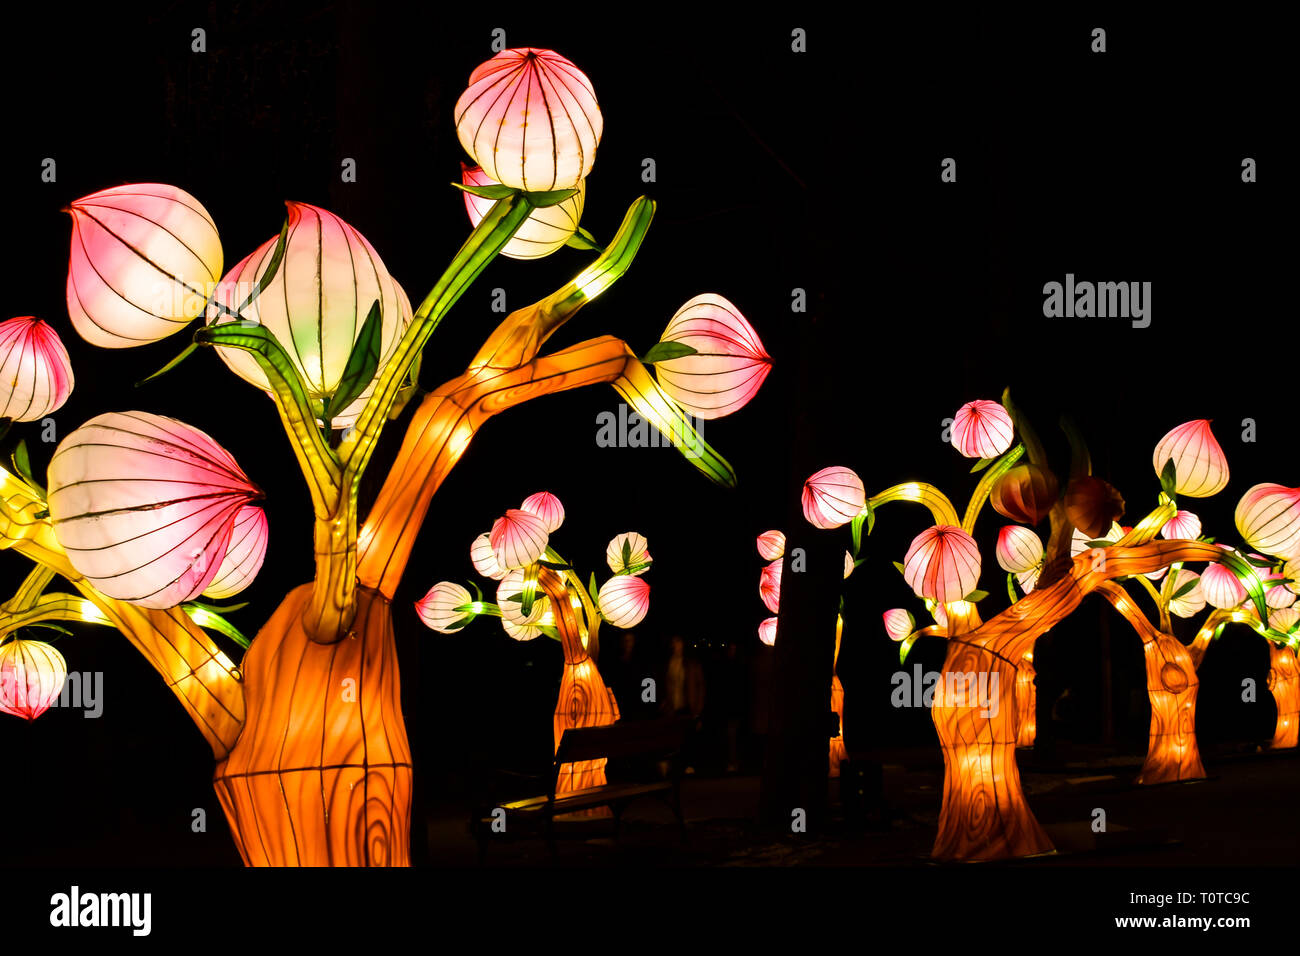 Glowing flowers art installation in Zagreb, Croatia during festival of lights Stock Photo